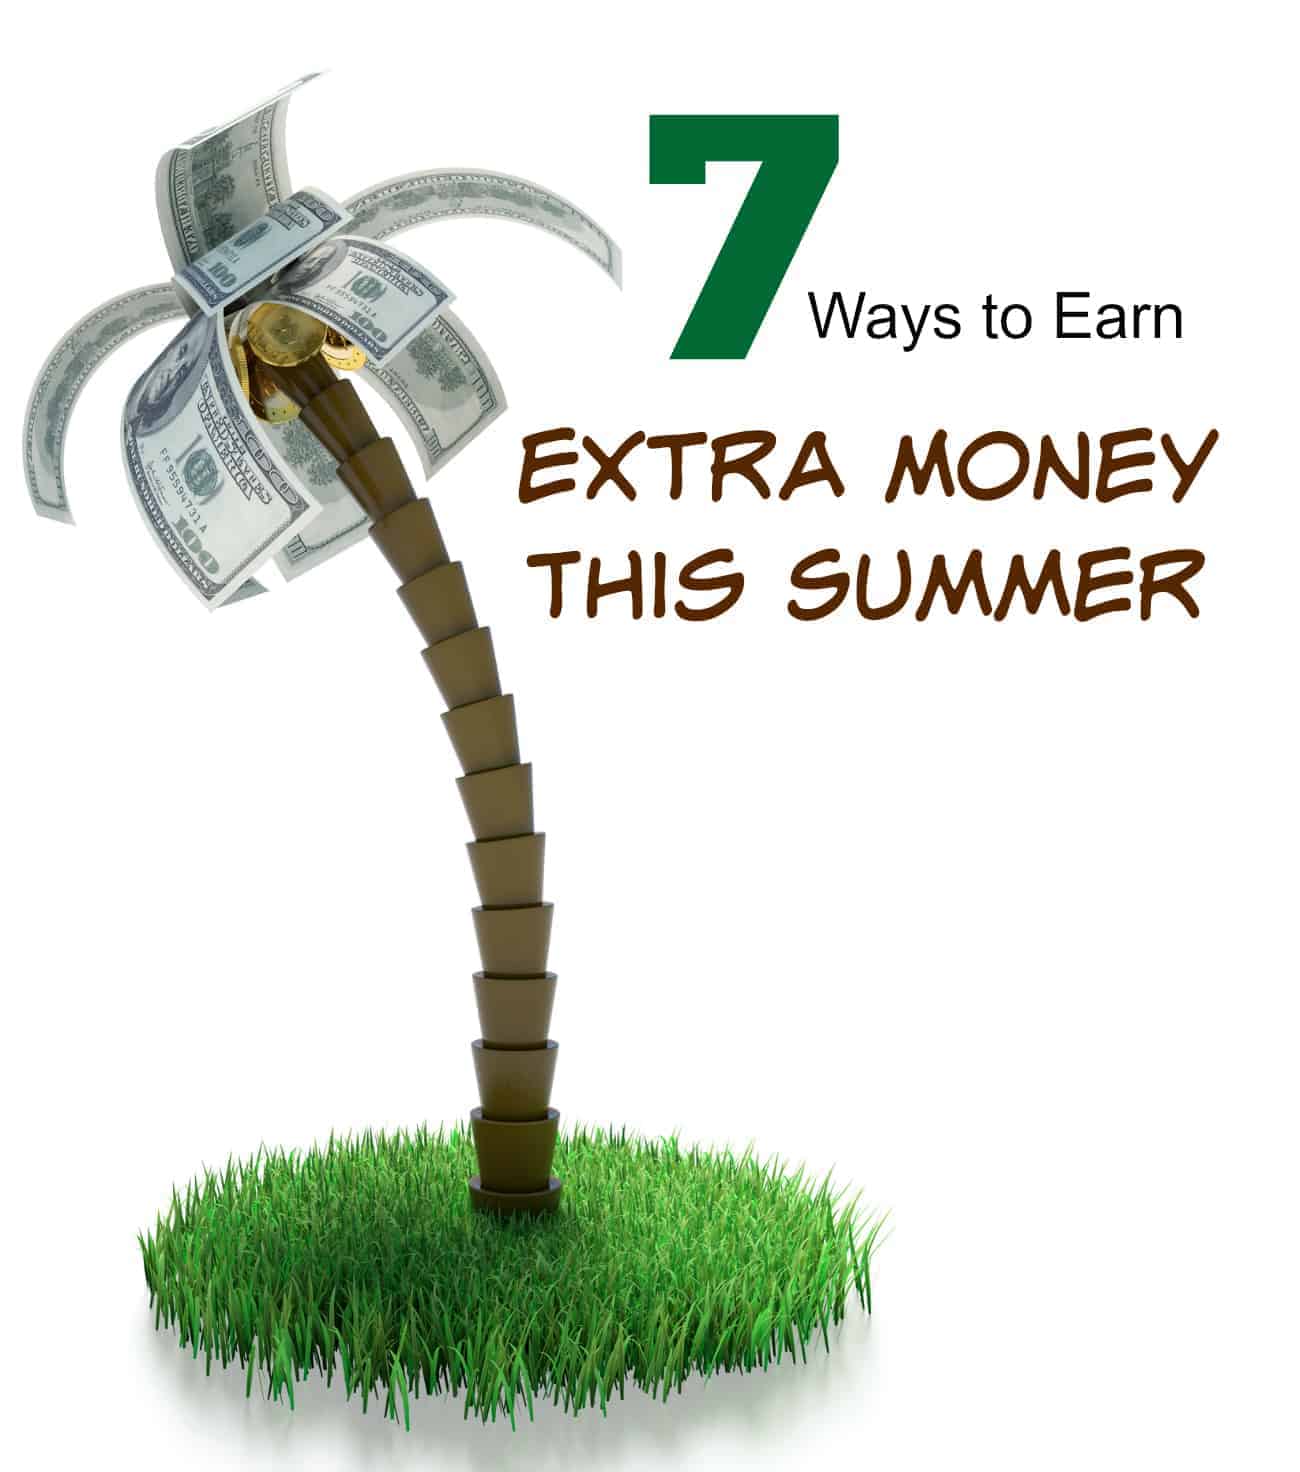 7 Ways to Earn Extra Money This Summer